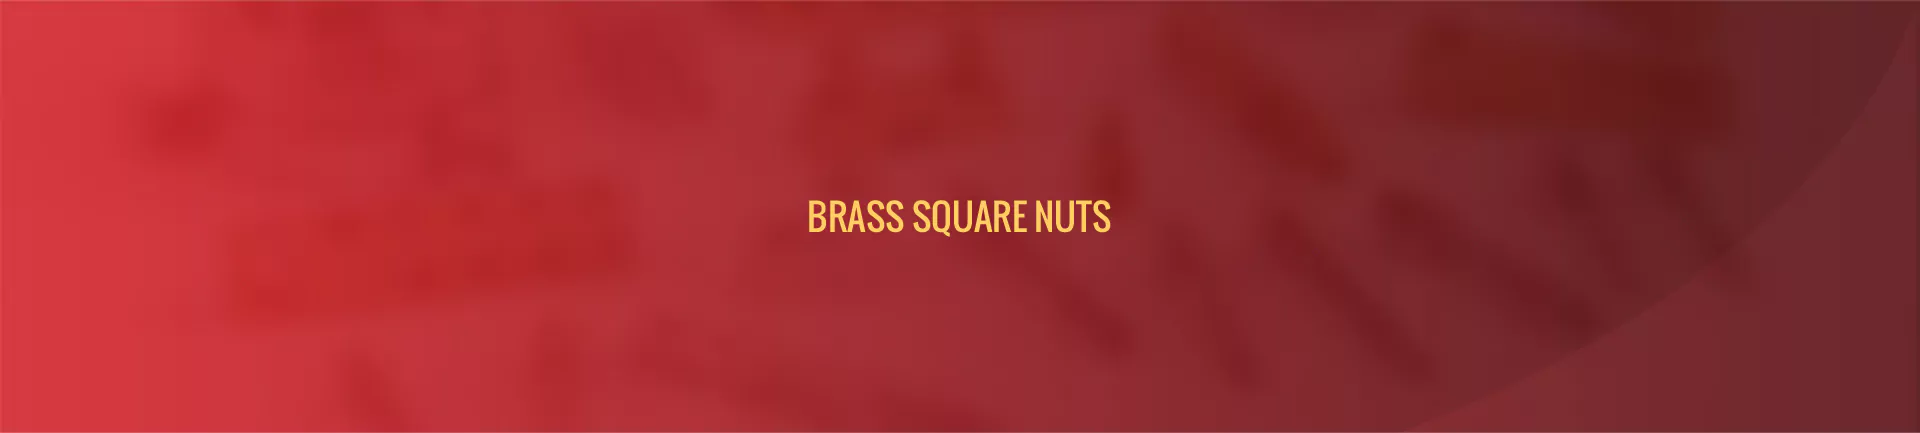 brass-square-nuts-banner